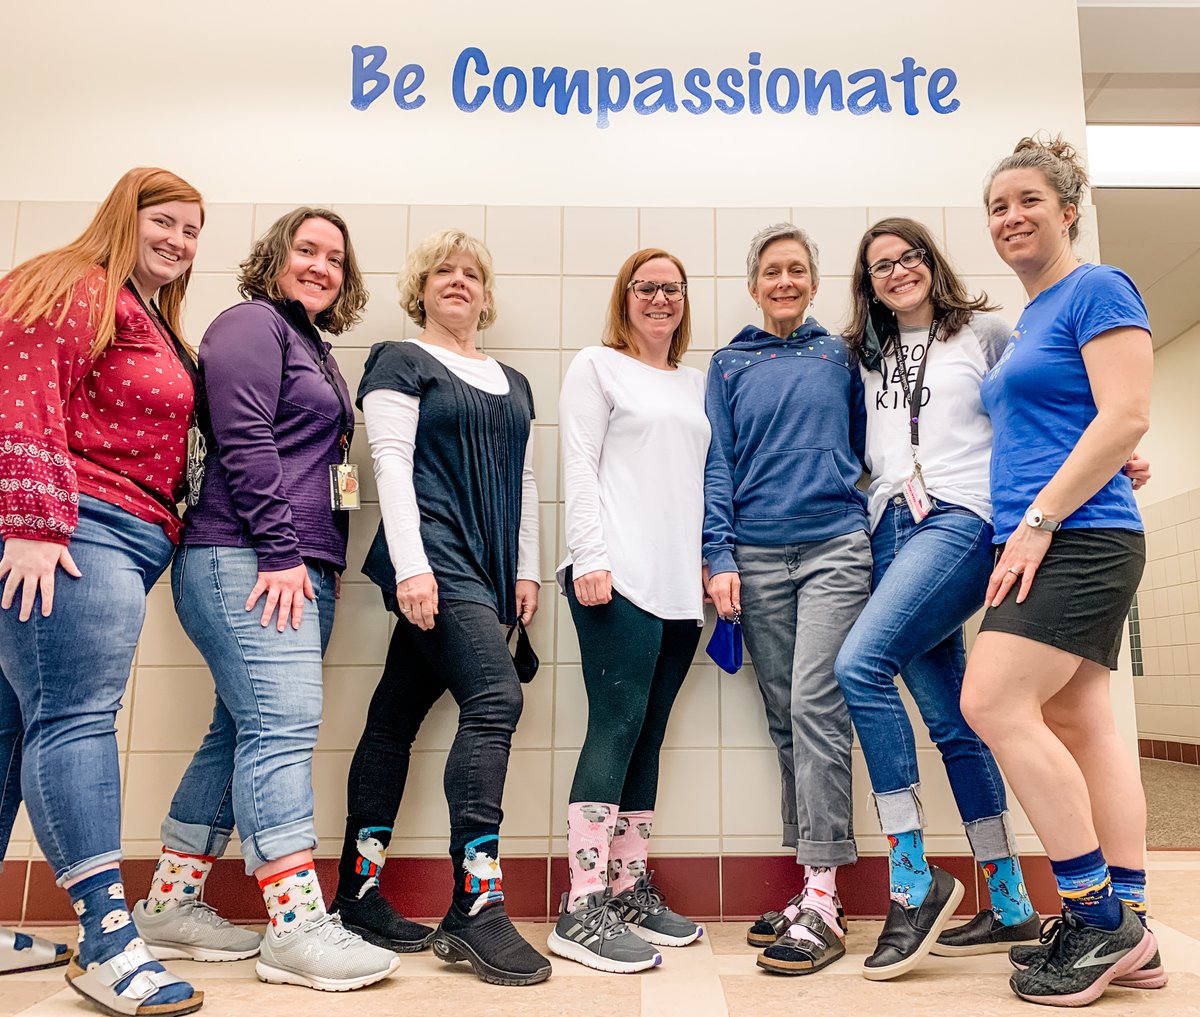 Rock your socks🧦 to show support for #WordDownSyndromeDay March 21st #iThinkQV 🧦